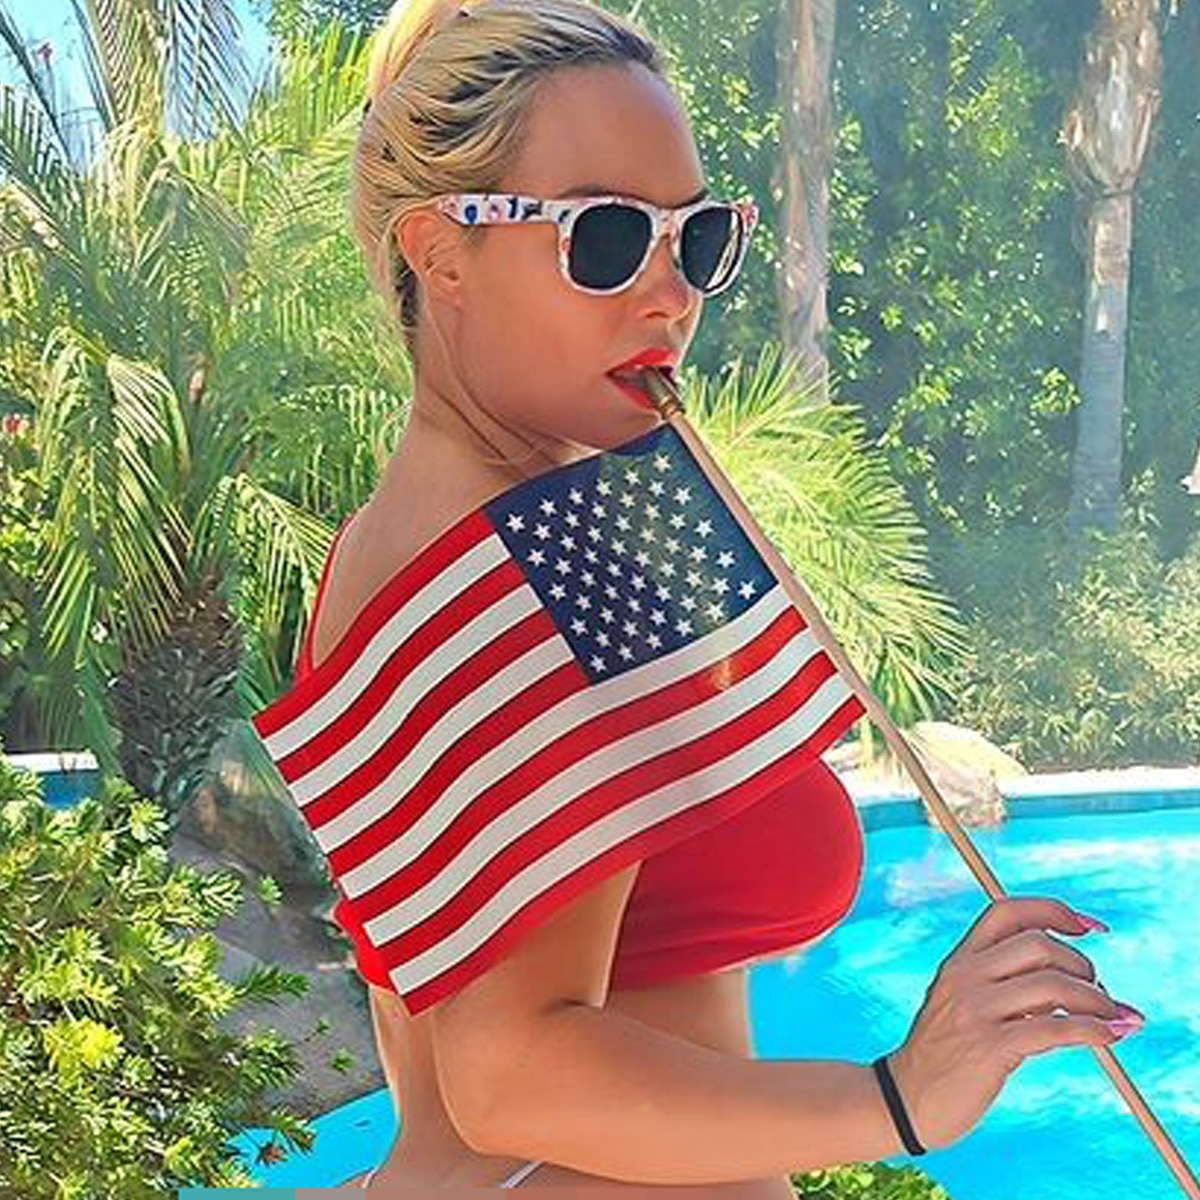 Ice-T Defends Wife Coco Austin After She Posts NSFW Pool Photo pic